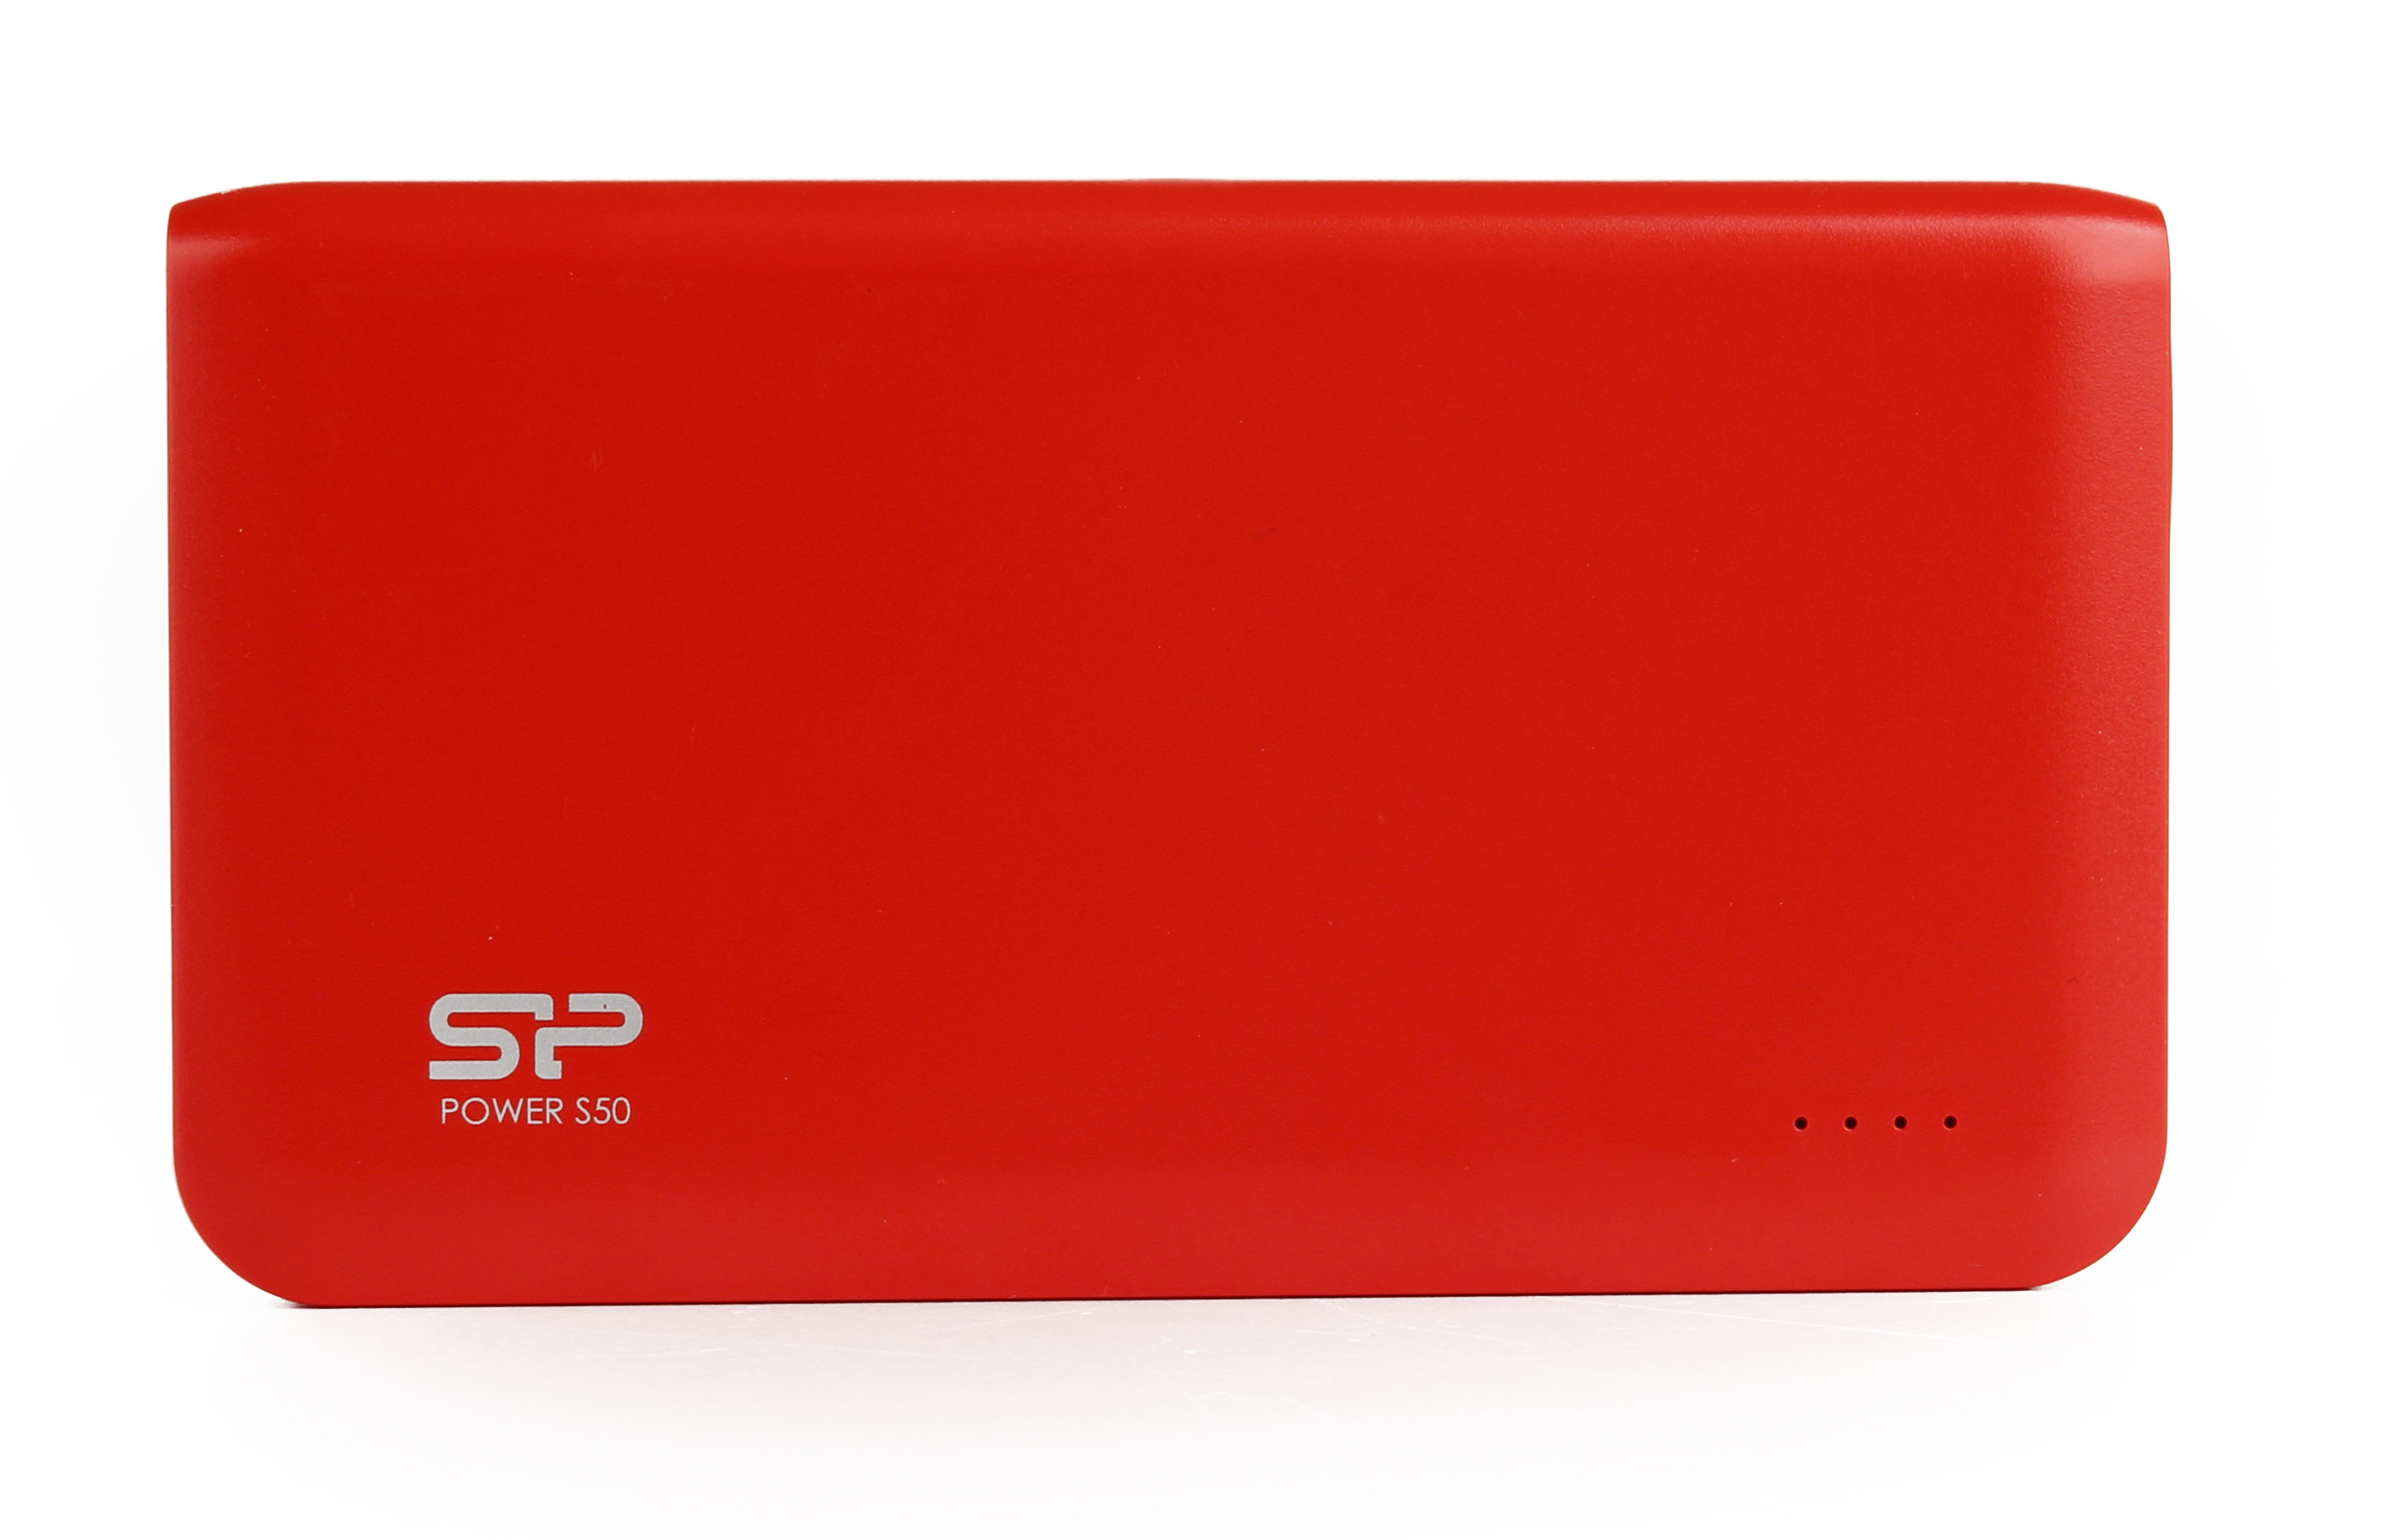 Power s отзывы. Silicon Power s105. Silicon Power gp28 Powerbank. Silicon Power Power Bank gs28. Silicon Power флешка с кнопкой.